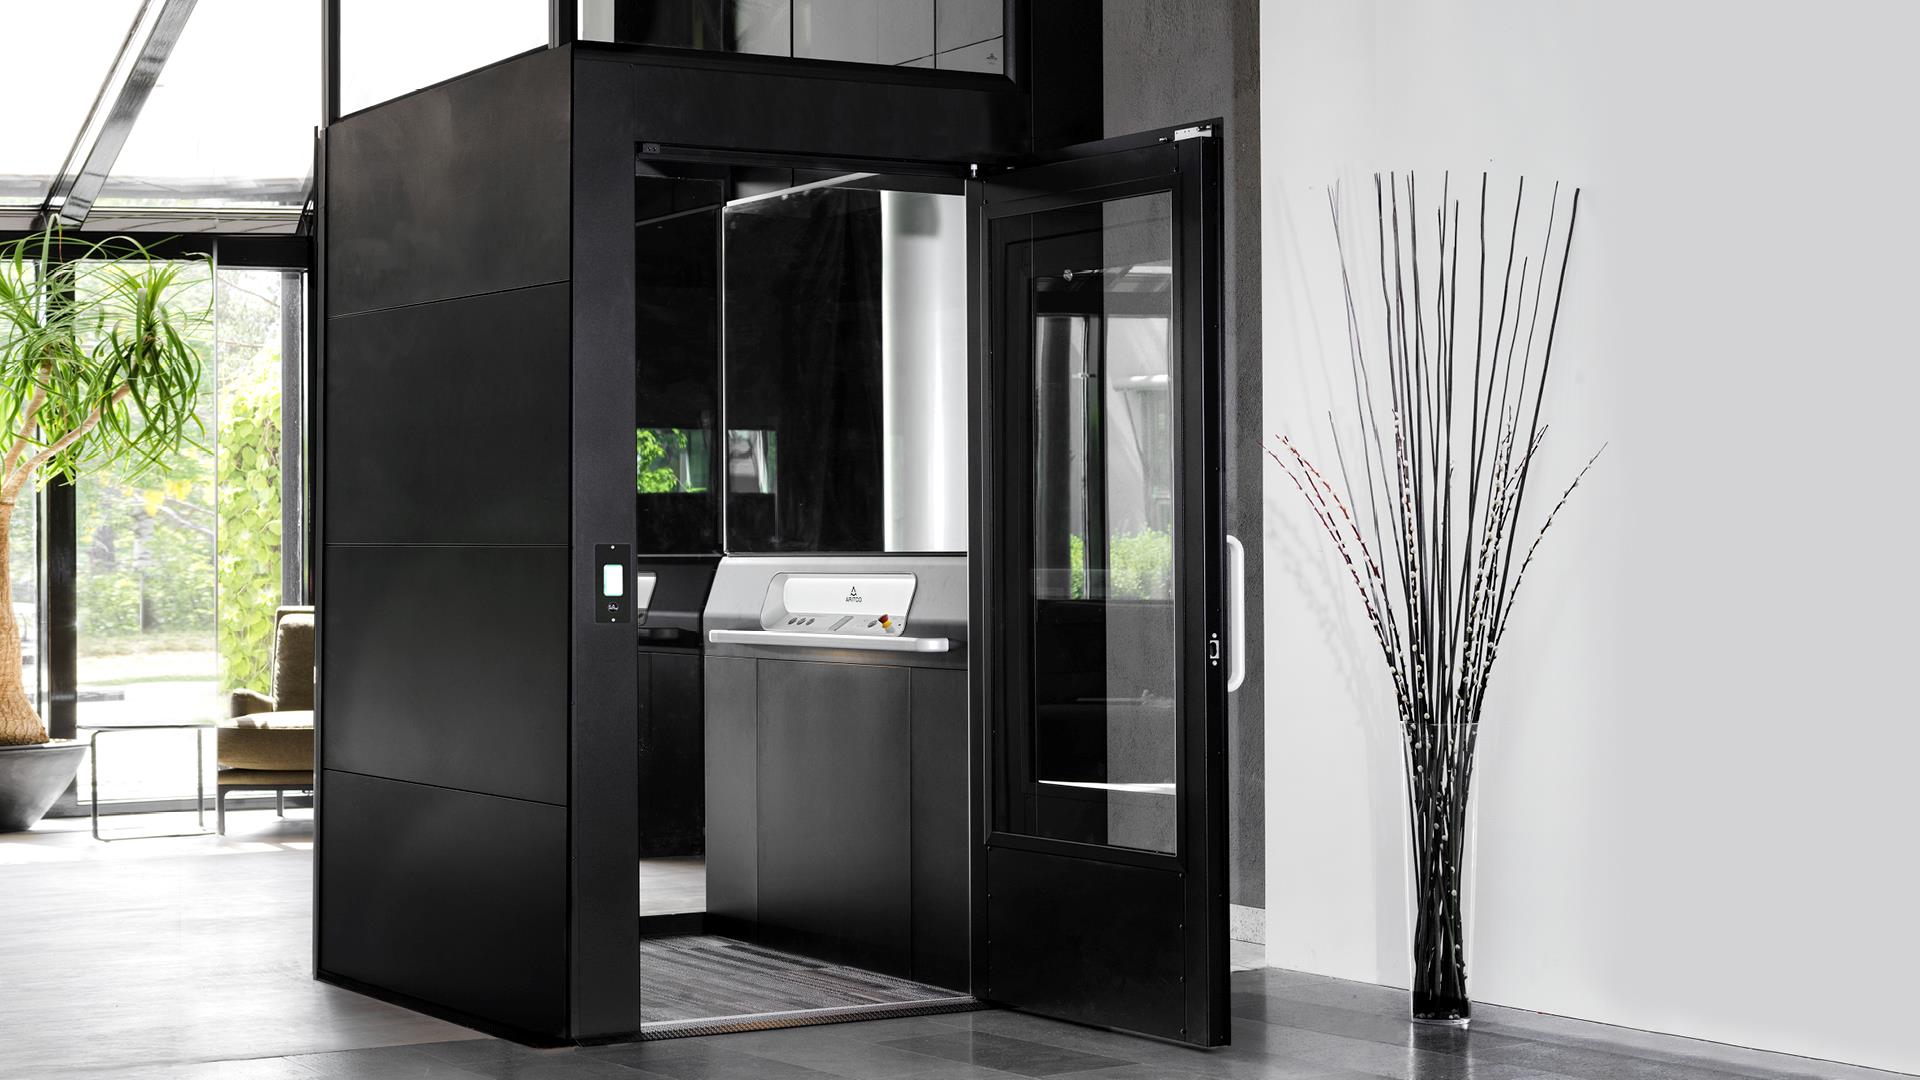 Home lift in black with wheelchair access from Aritco. Aritco HomeLift Access.